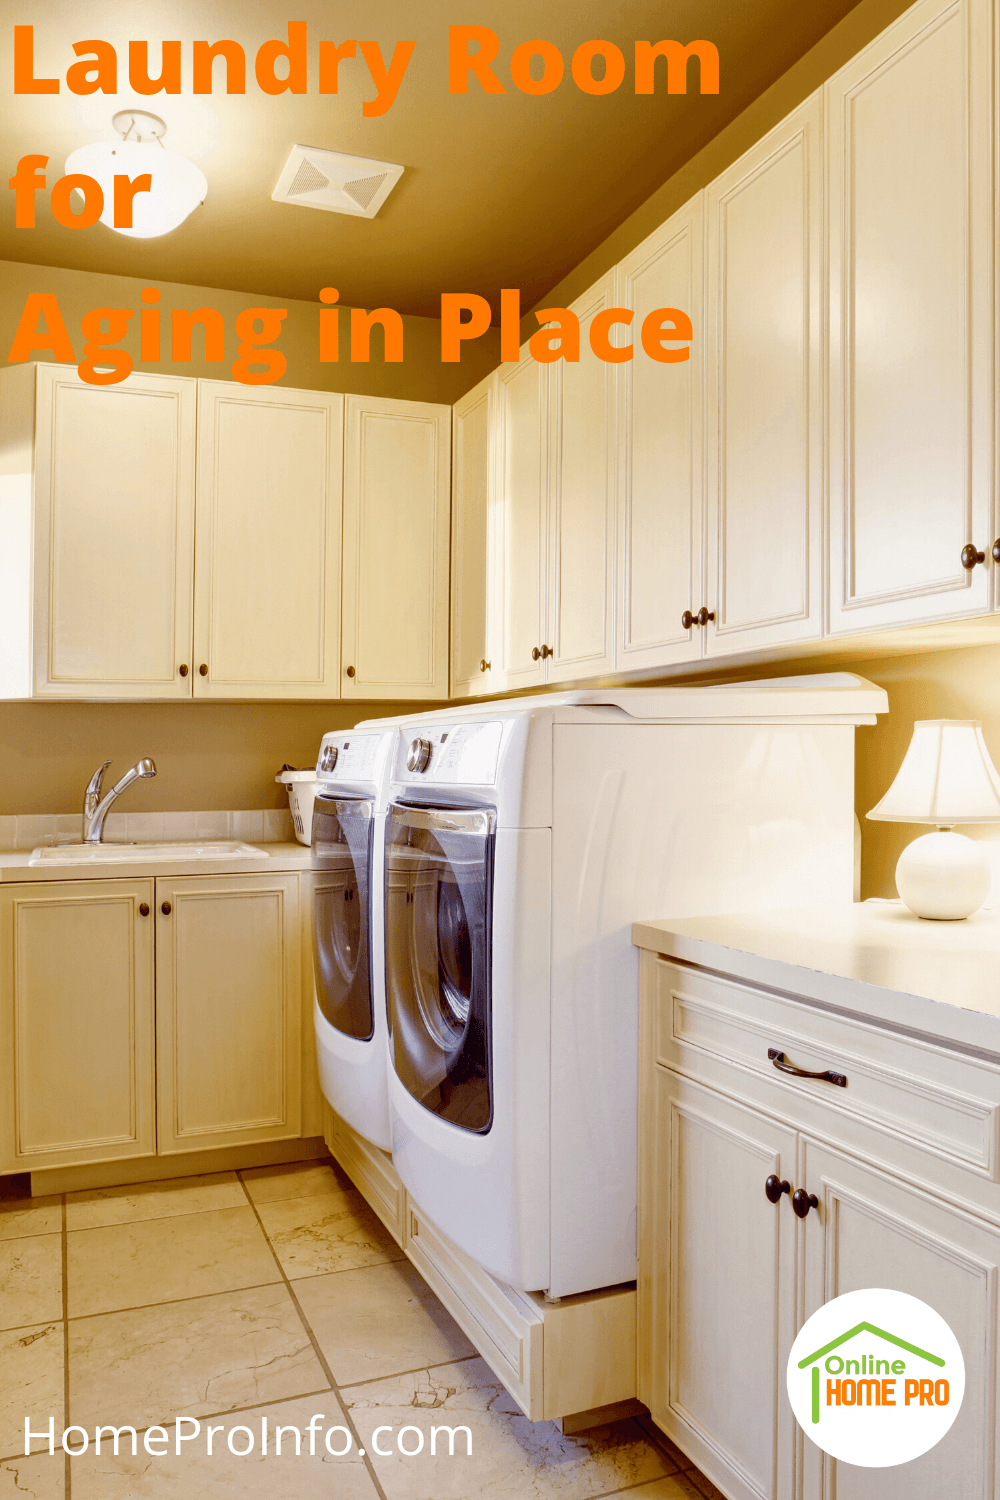 Laundry room for aging in place